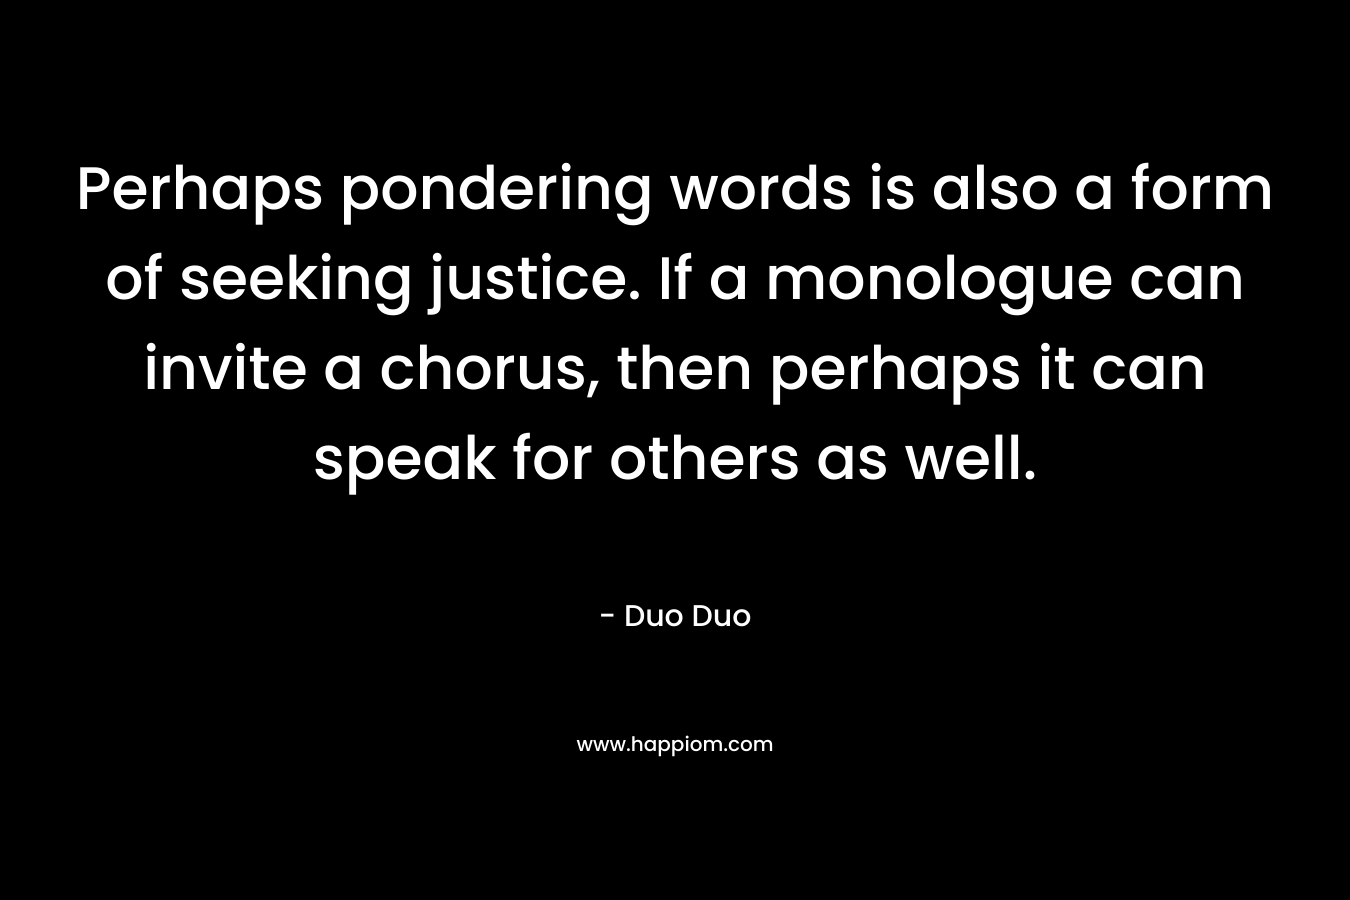 Perhaps pondering words is also a form of seeking justice. If a monologue can invite a chorus, then perhaps it can speak for others as well.